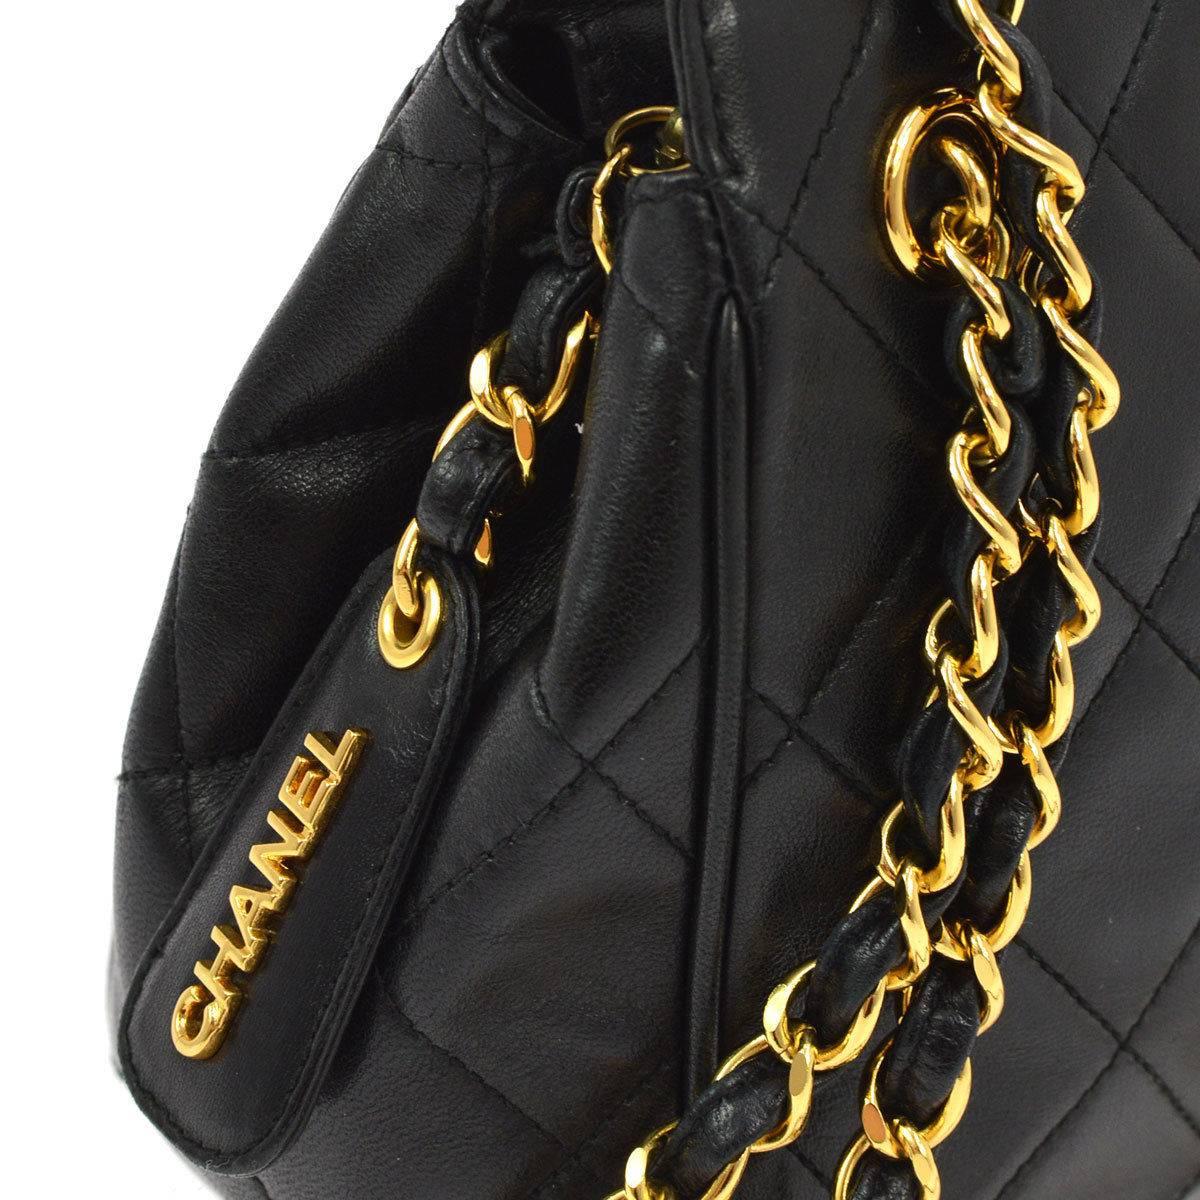 Chanel Black Lambskin Leather Top Handle Evening Shoulder Party Bag 

Lambskin leather
Gold tone hardware
Zipper closure
Made in Italy
Date code 3848412
Shoulder strap drop 10